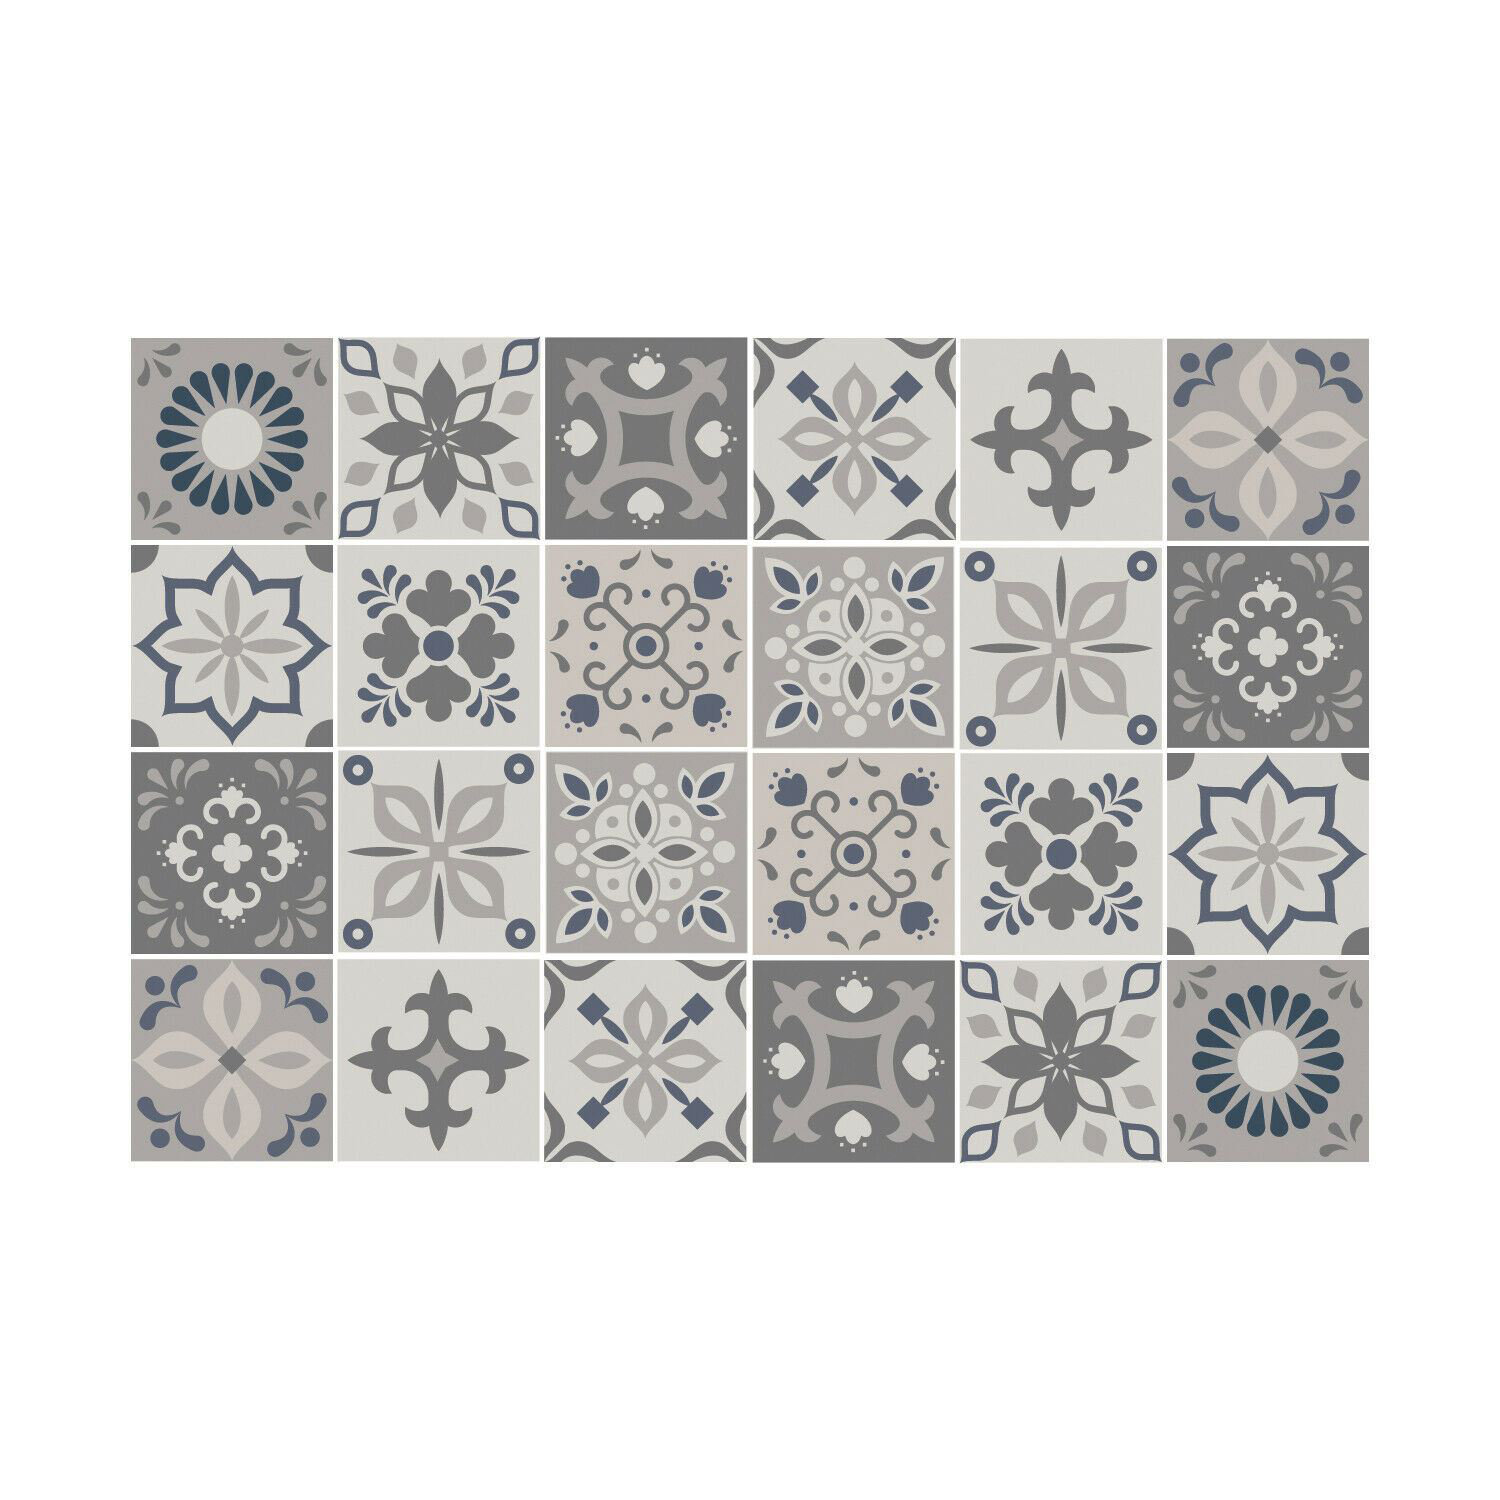 6 x 6 in Palace Light Grey Moroccan Wall Tile Stickers Set 15 x 15 cm 24 pcs 